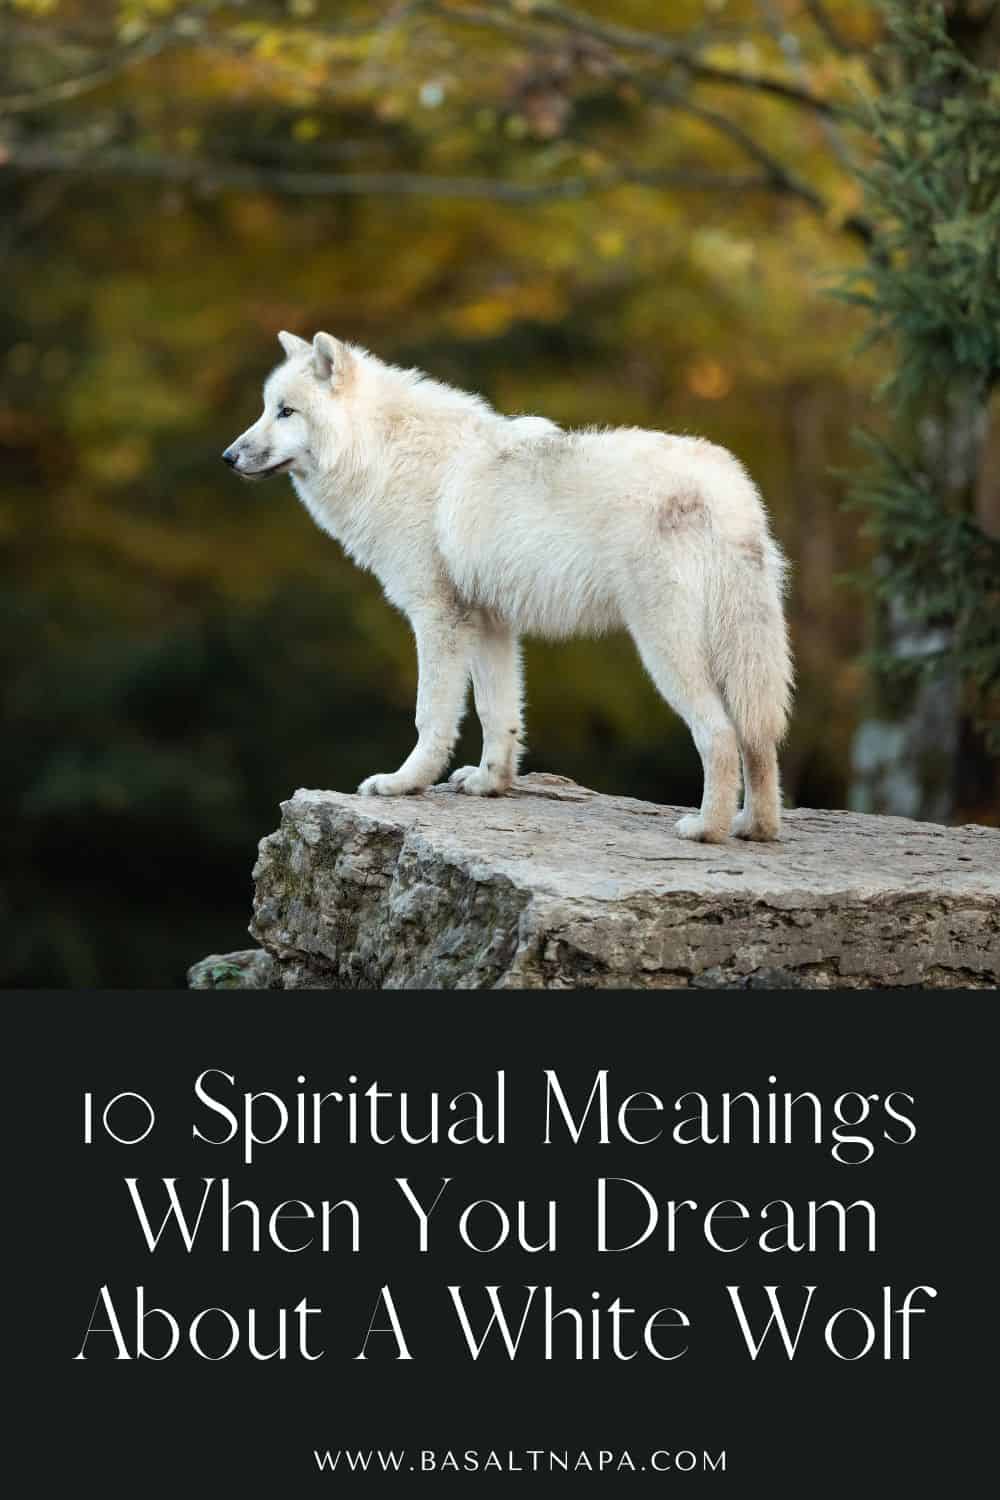 What does it mean when dreaming about a white wolf